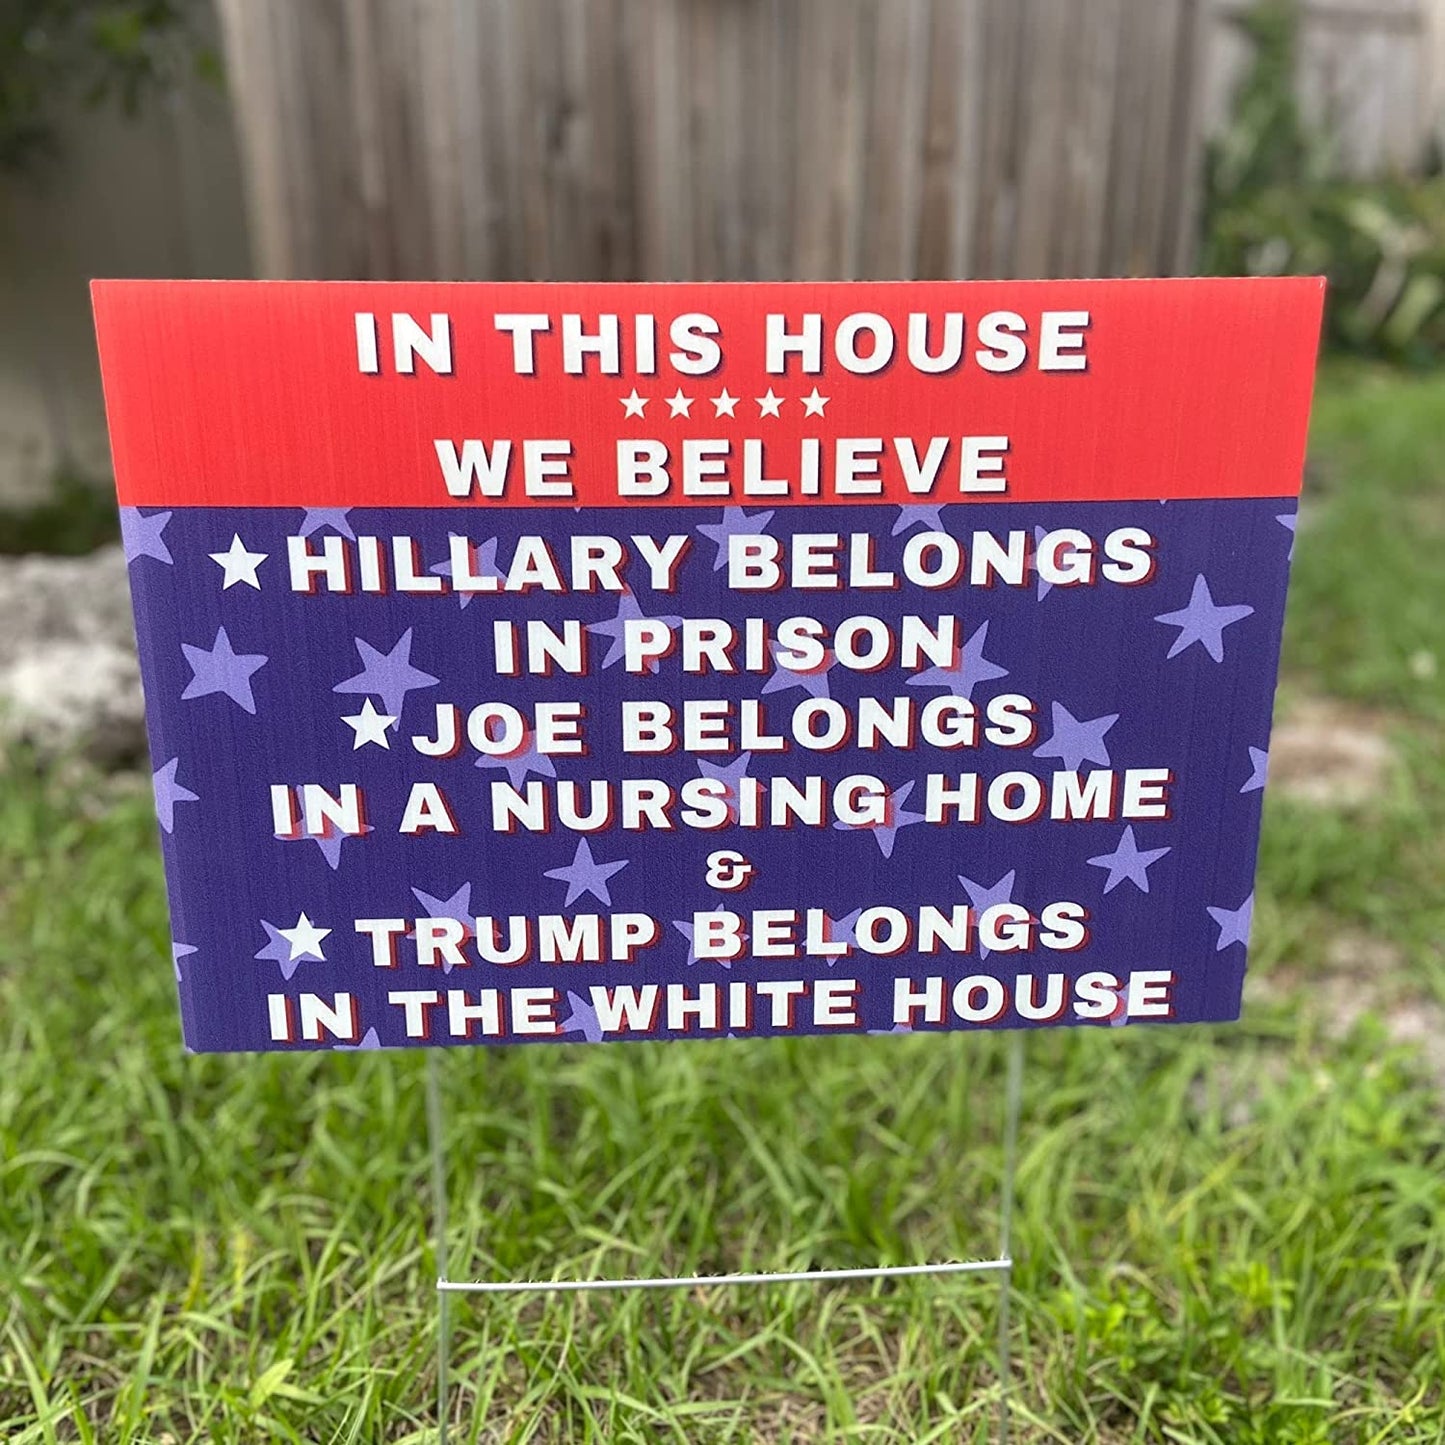 Hillary for Prison - Biden For Nursing Home - Pro Trump 18"x12" Double-Sided Yard Sign - 2 PIECES